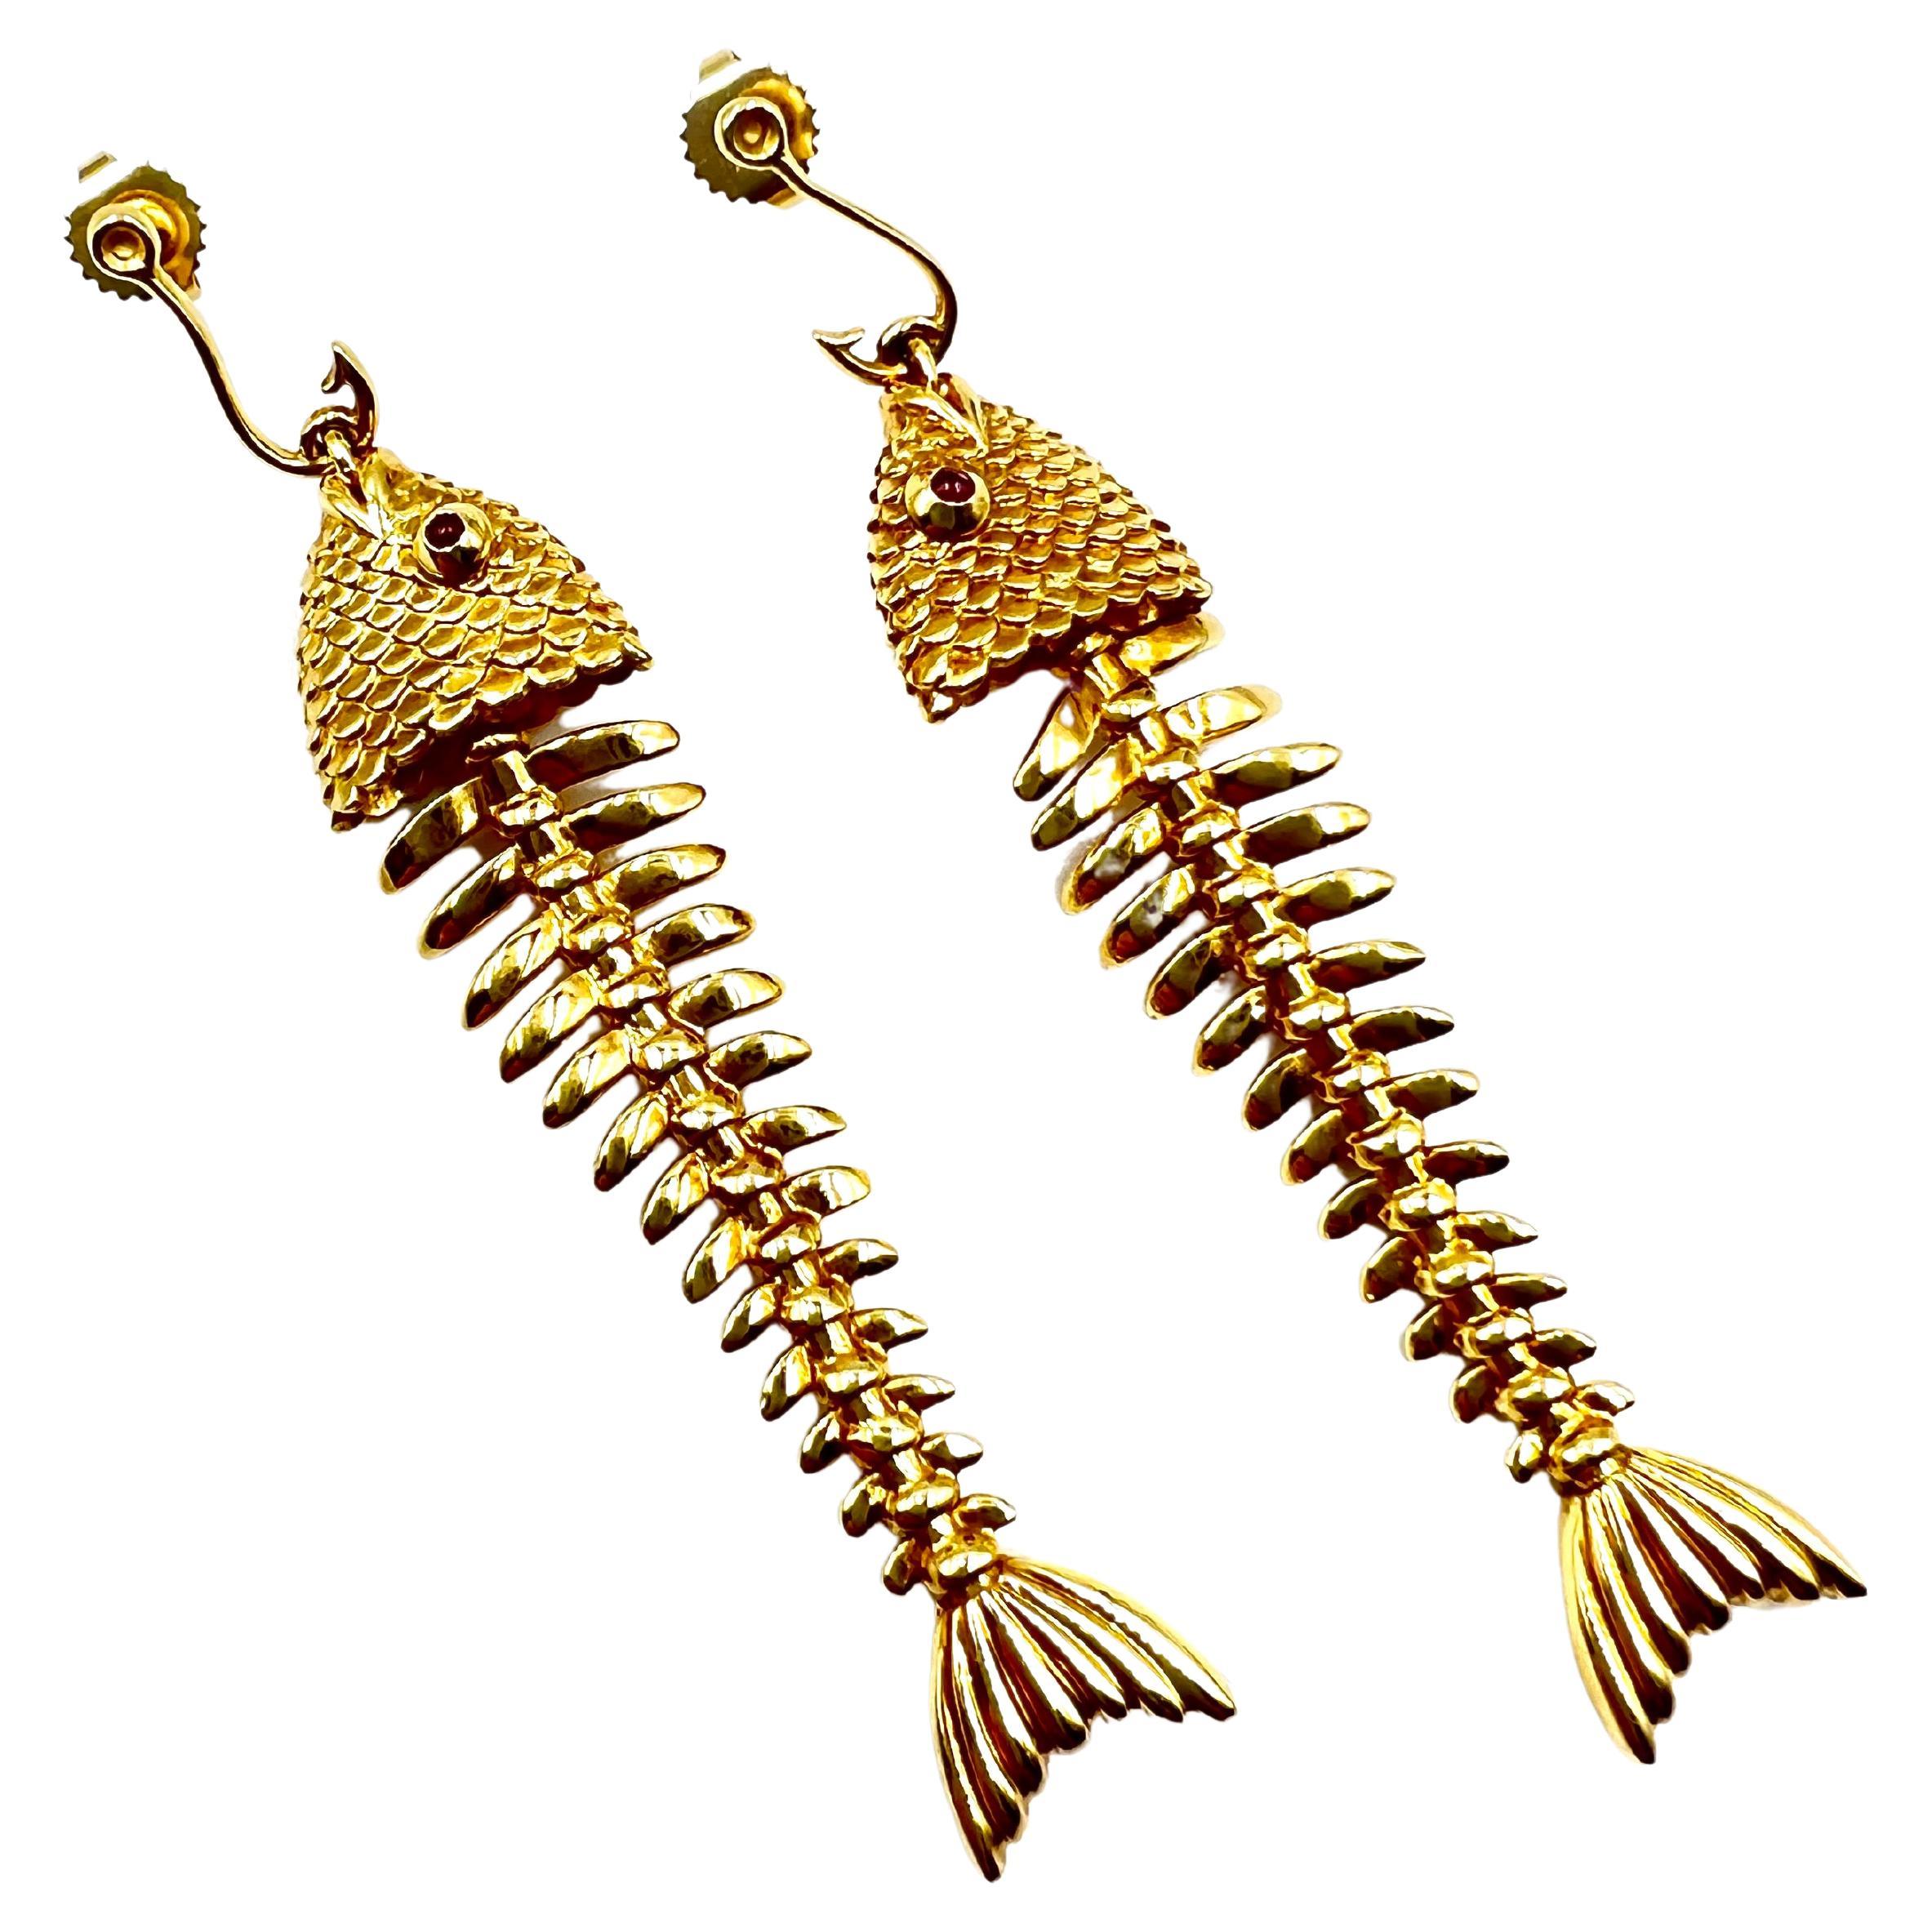 Tiffany & Co. 18kt yellow gold fish design, flexible drop style earrings measuring approximately 2.75